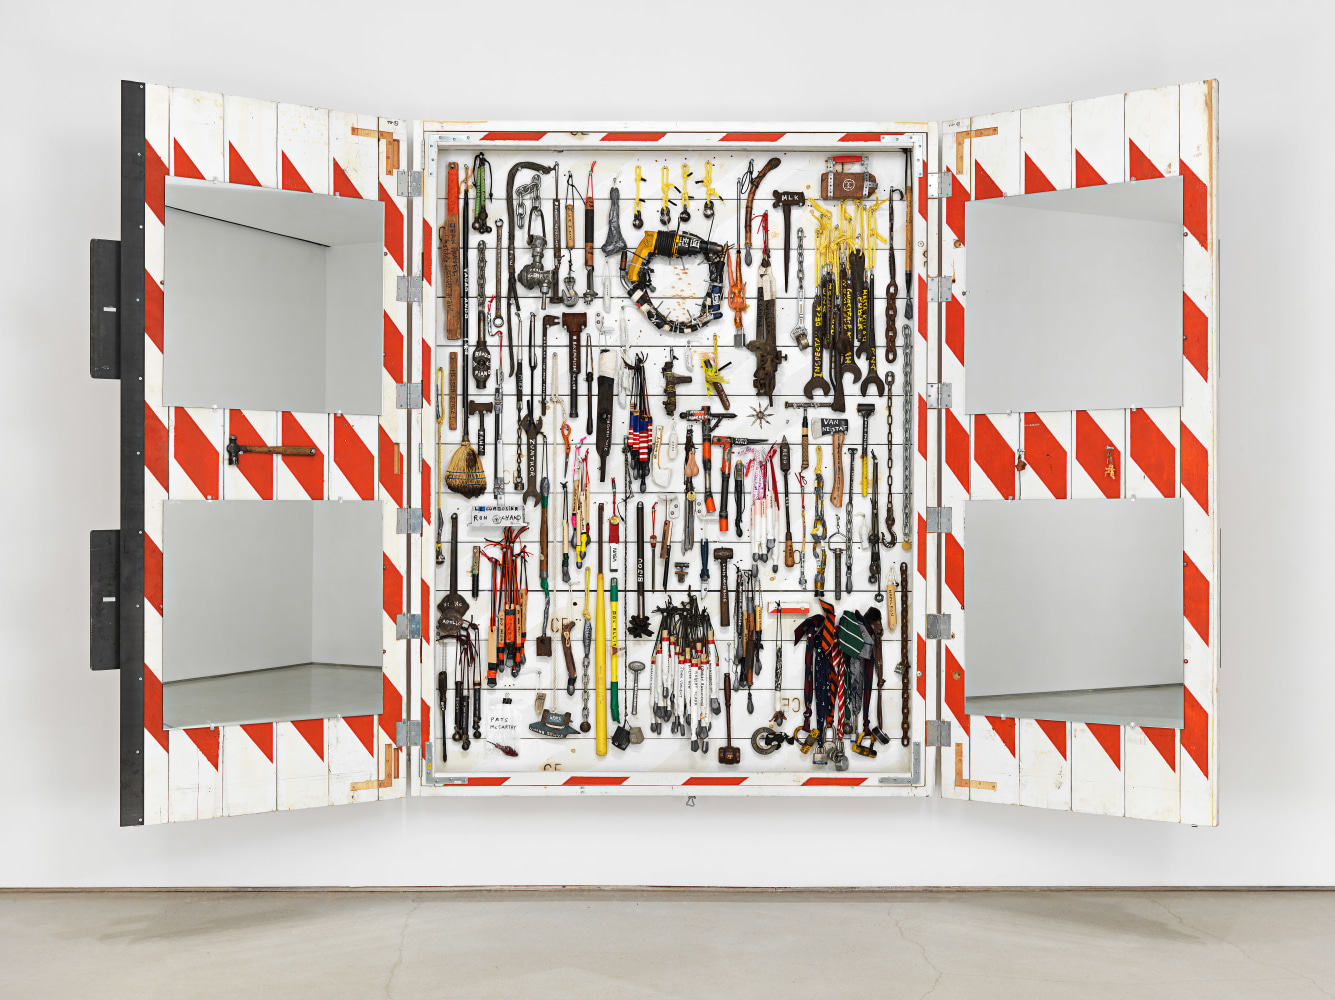 Tom Sachs
The Cabinet, 2014
mixed media
96 x 156 x 11 1/2 inches (243,8 x 396,2 x 29,2 cm)
SW 16107